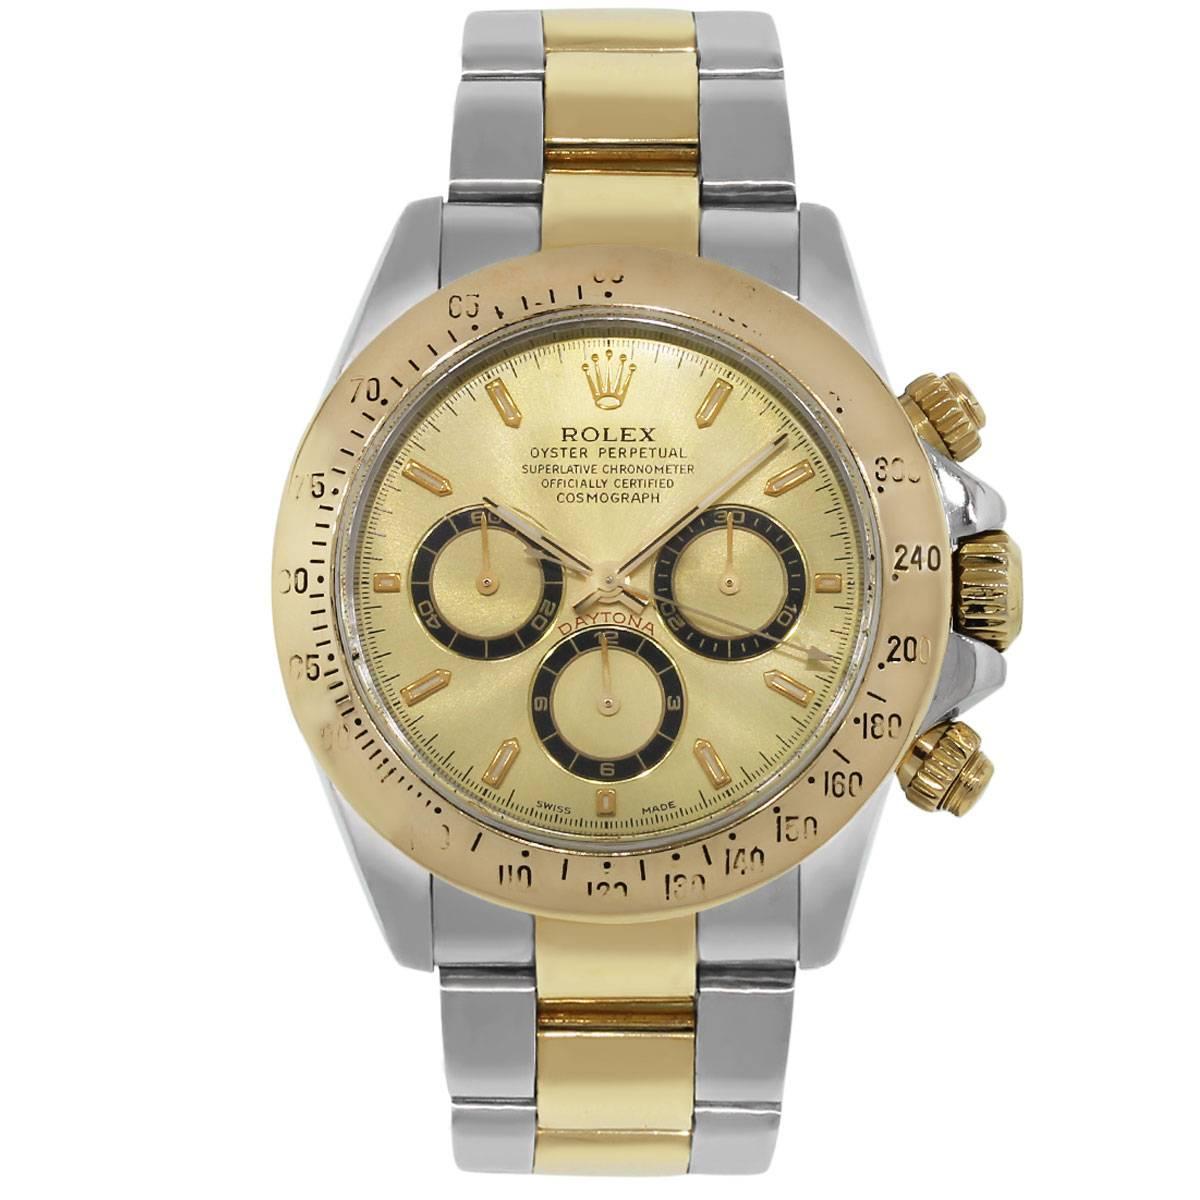 Brand: Rolex
MPN: Daytona
Model: 16523
Case Material: 18k yellow gold and stainless steel
Case Diameter	: 40mm
Crystal: Scratch resistant sapphire
Bezel: Fixed 18k yellow gold with engraved Tachymeter
Dial: Champagne Dial with Luminescent